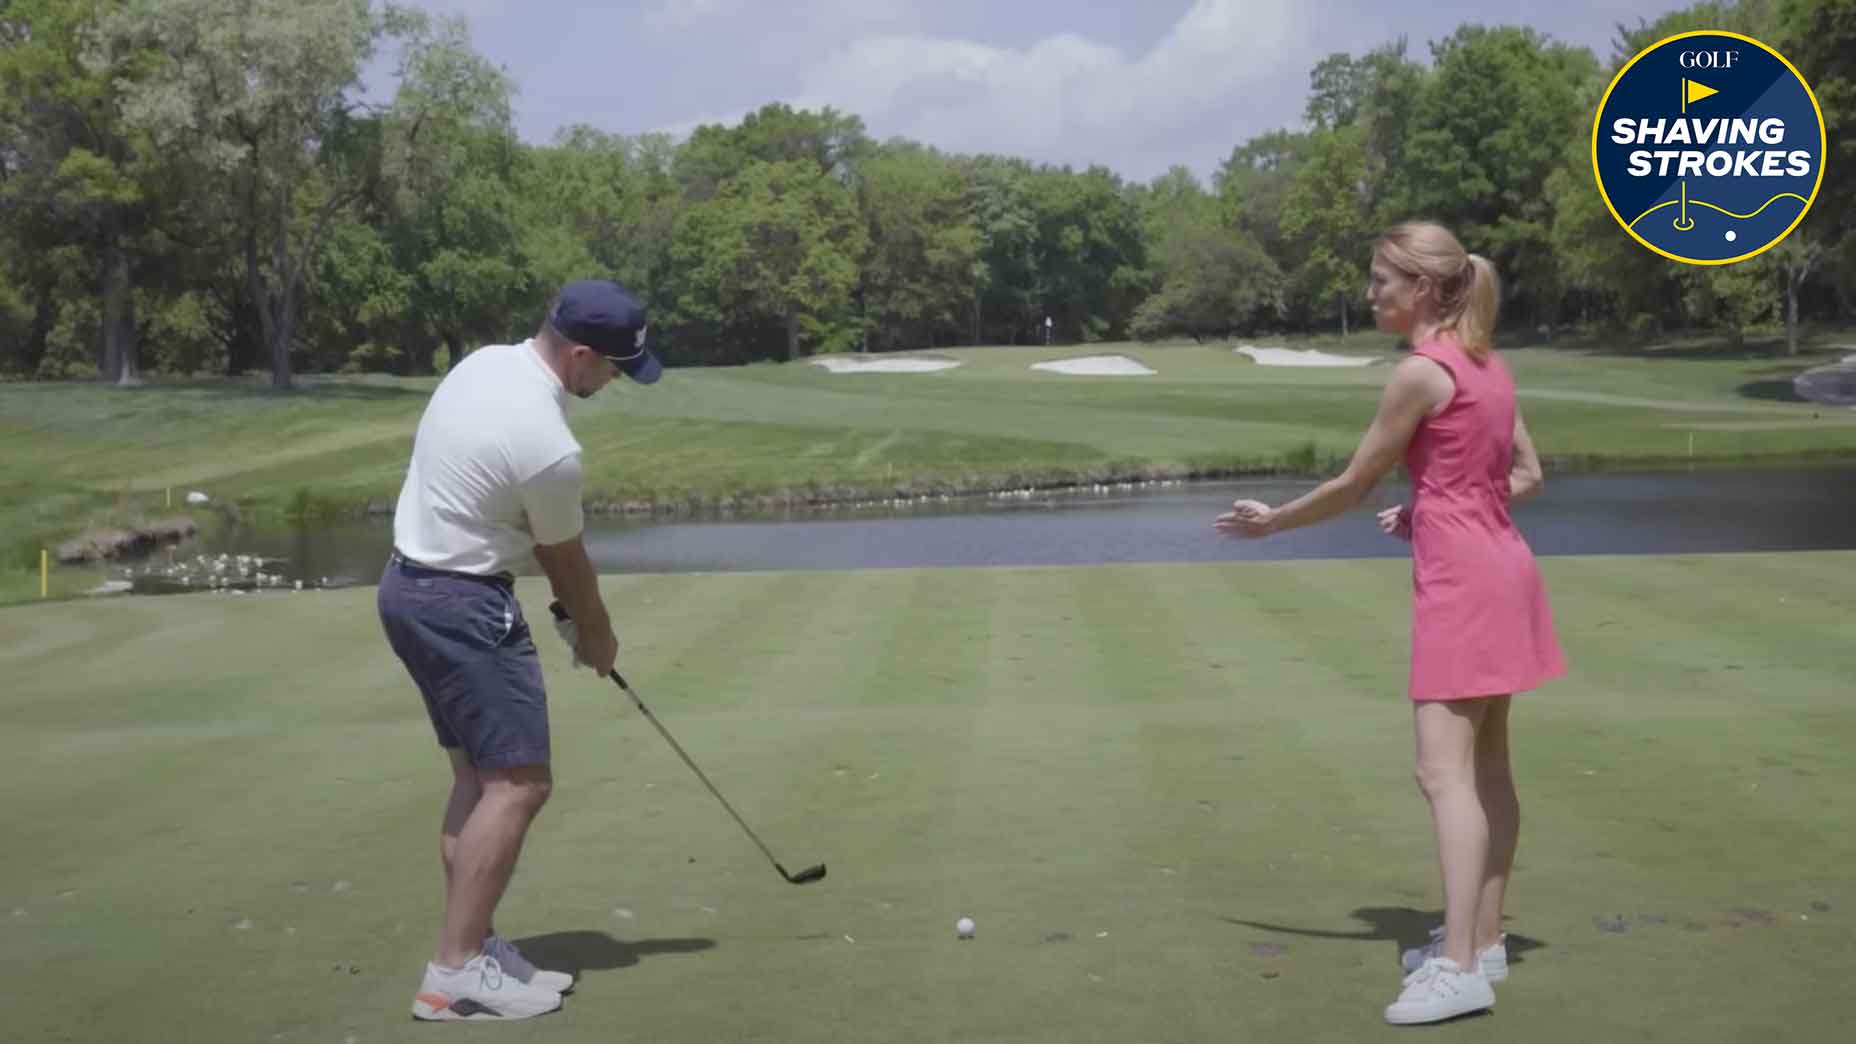 GOLF Top 100 Teacher Trillium Rose shares several ways to help with clubface control, one of which is to envision a finish line to the ball